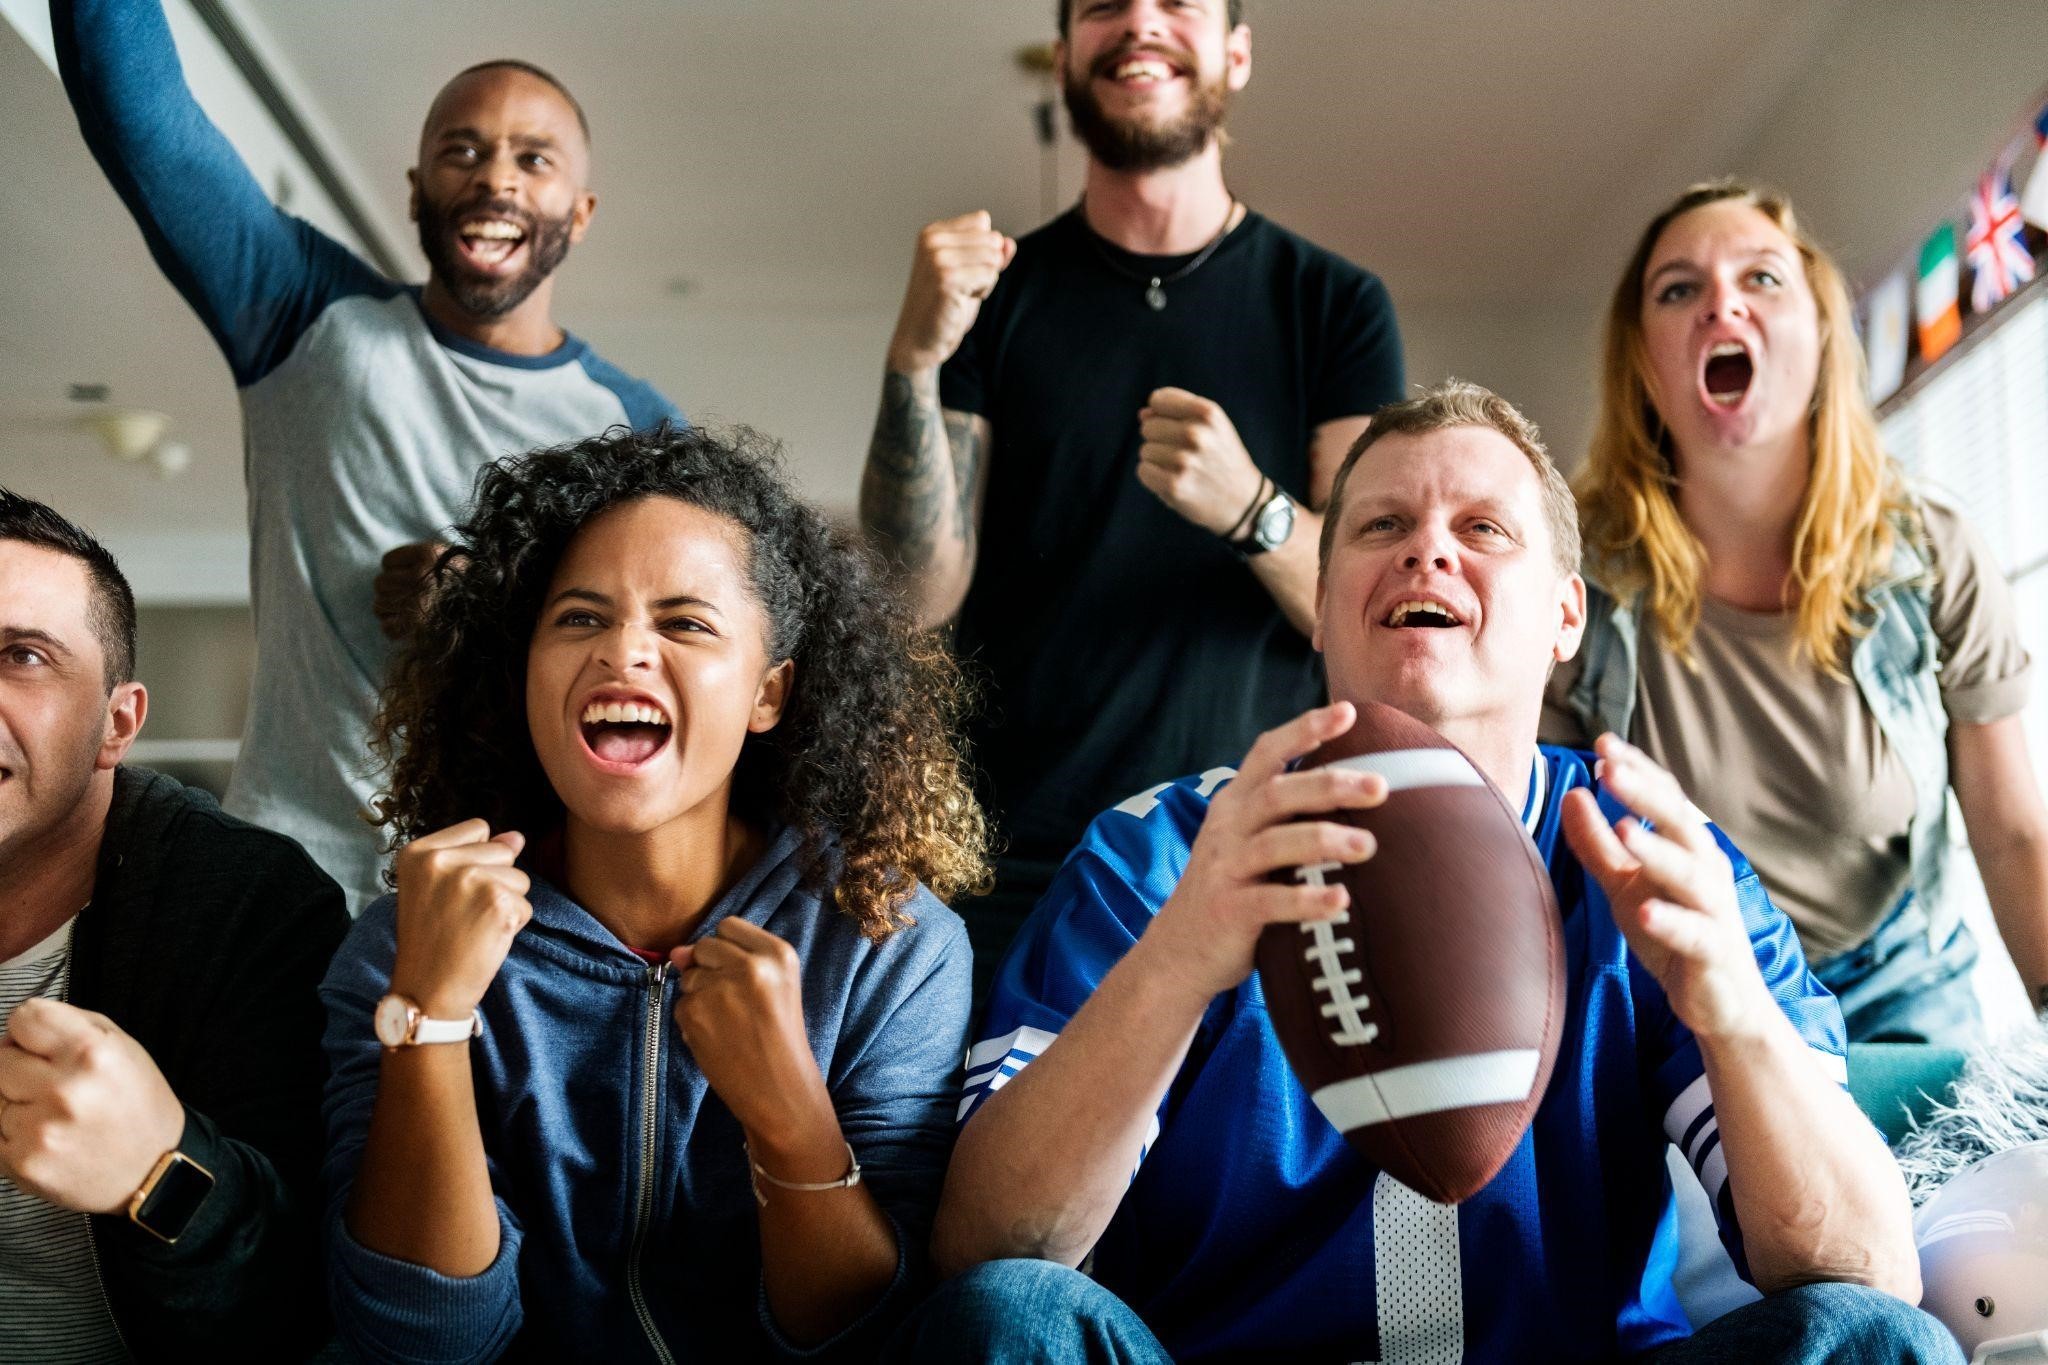 GO BIG, AT HOME FOR THE SUPER BOWL